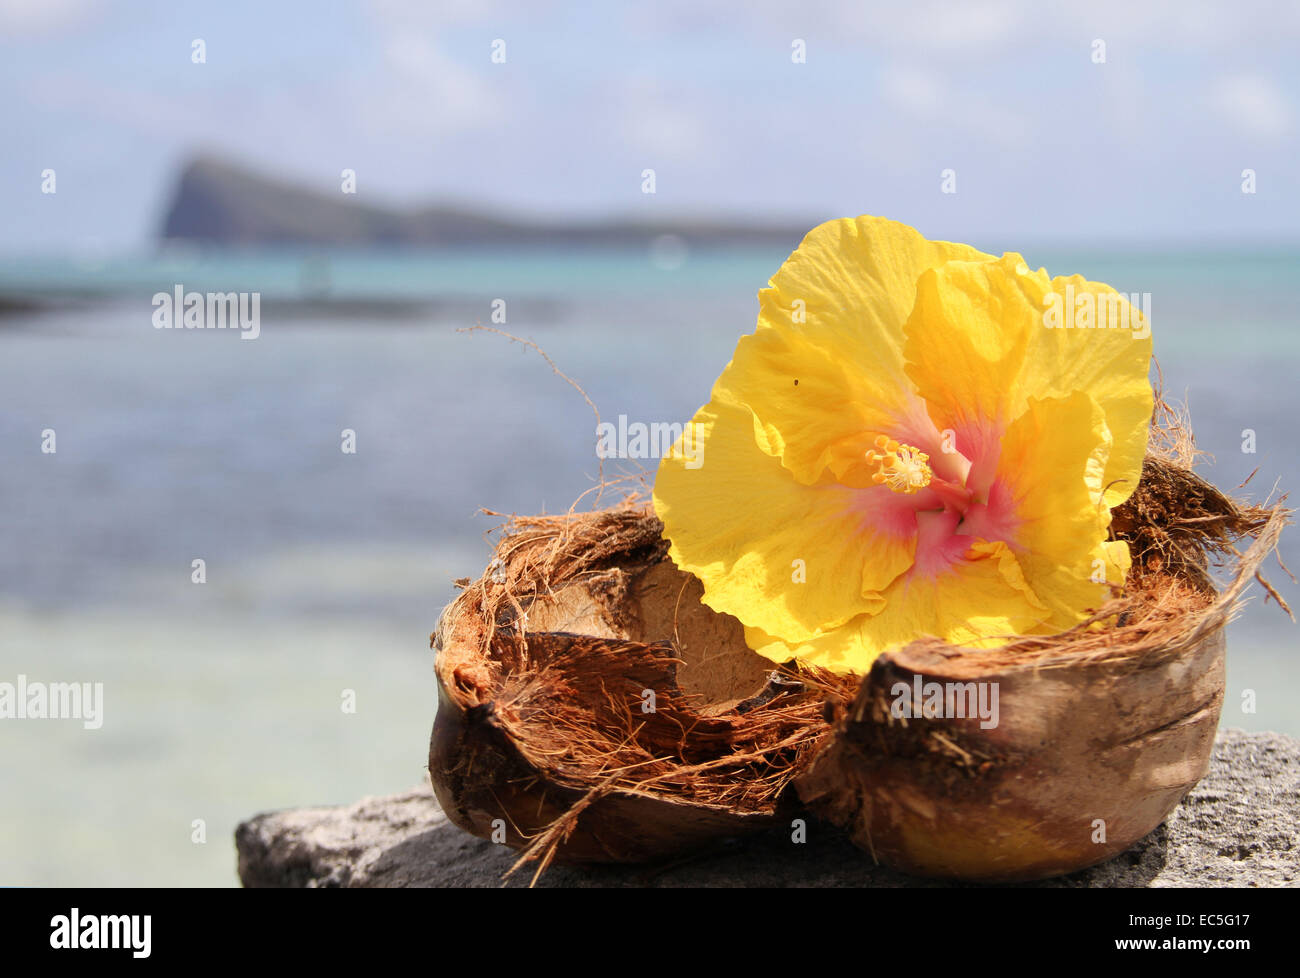 Hibiscus flower and coconut Stock Photo